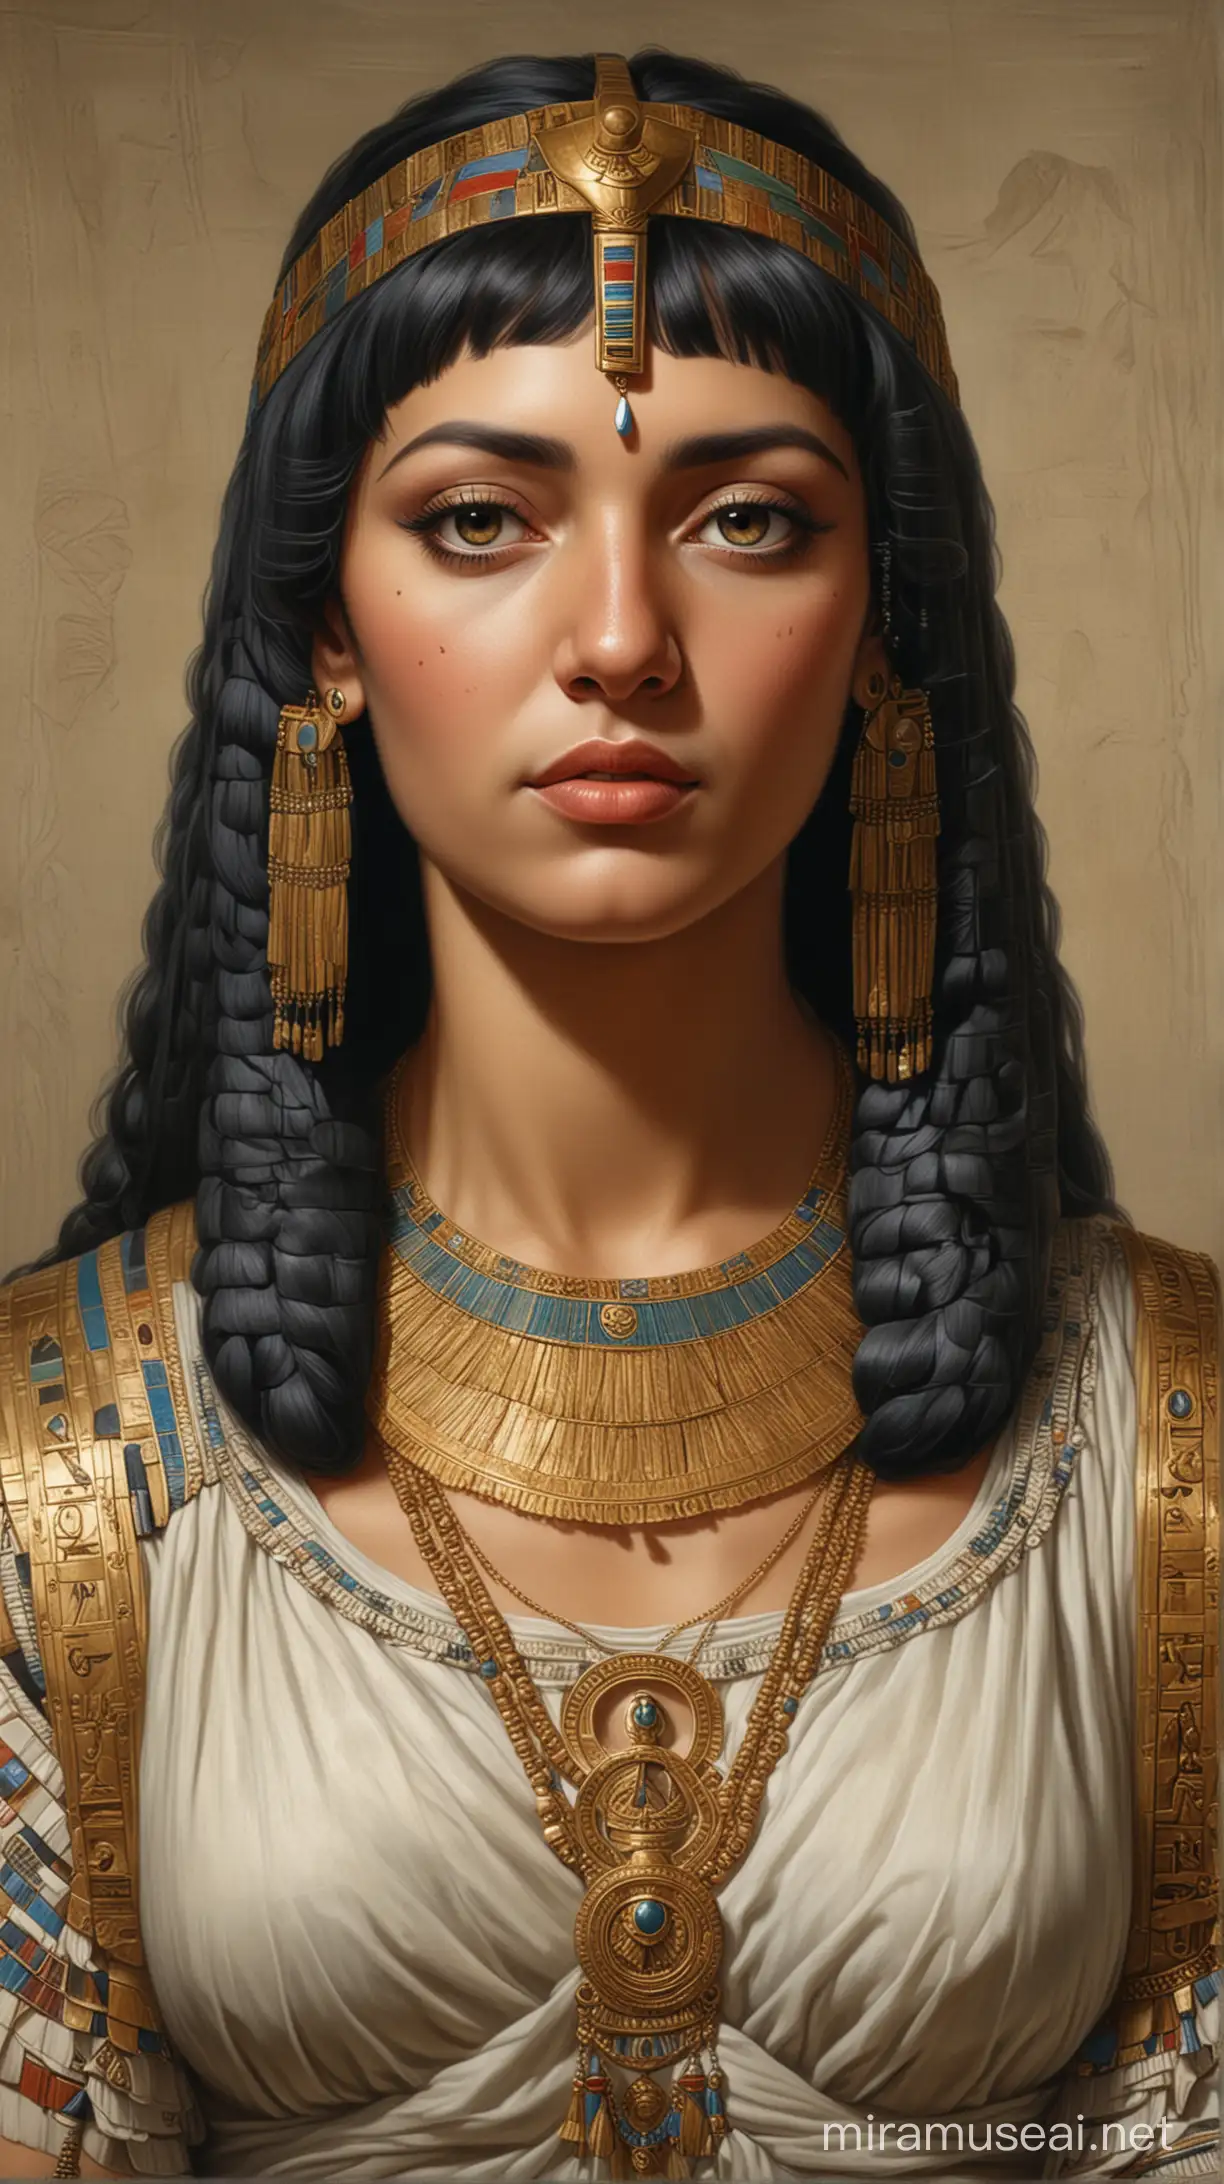 Hyperrealistic Portraits of Cleopatra and Her Allies Depicting Political Influence and Alliances